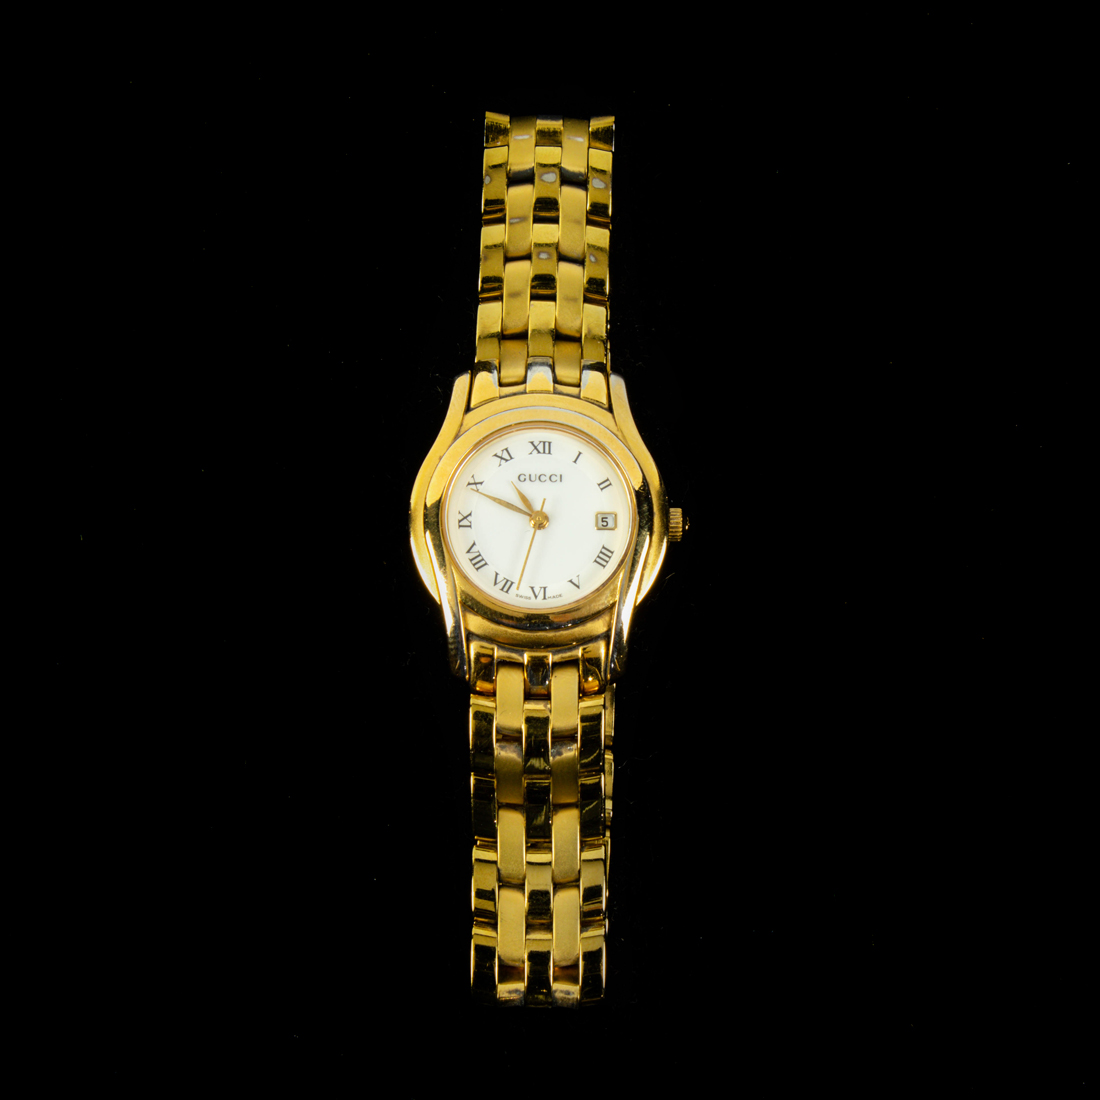 LADIES GUCCI WRISTWATCH WITH DATE 3a1a4b